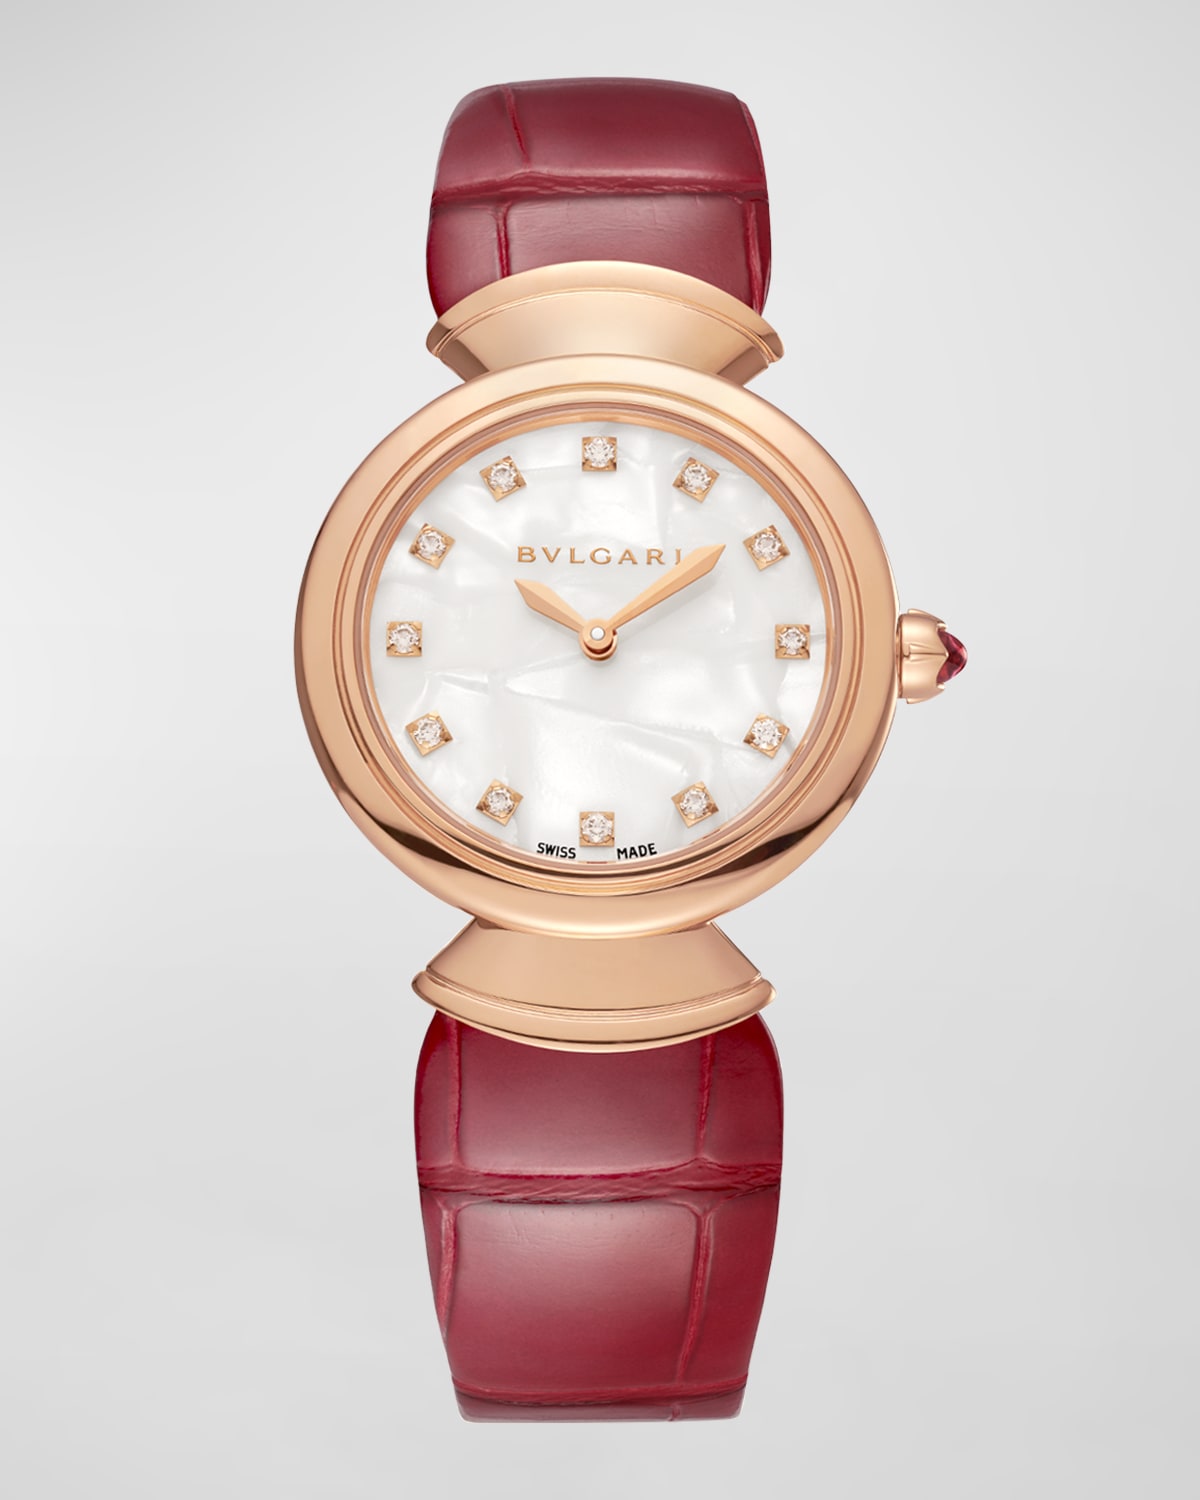 Diva's Dream Rose Gold Mother-of-Pearl Watch with Alligator Strap